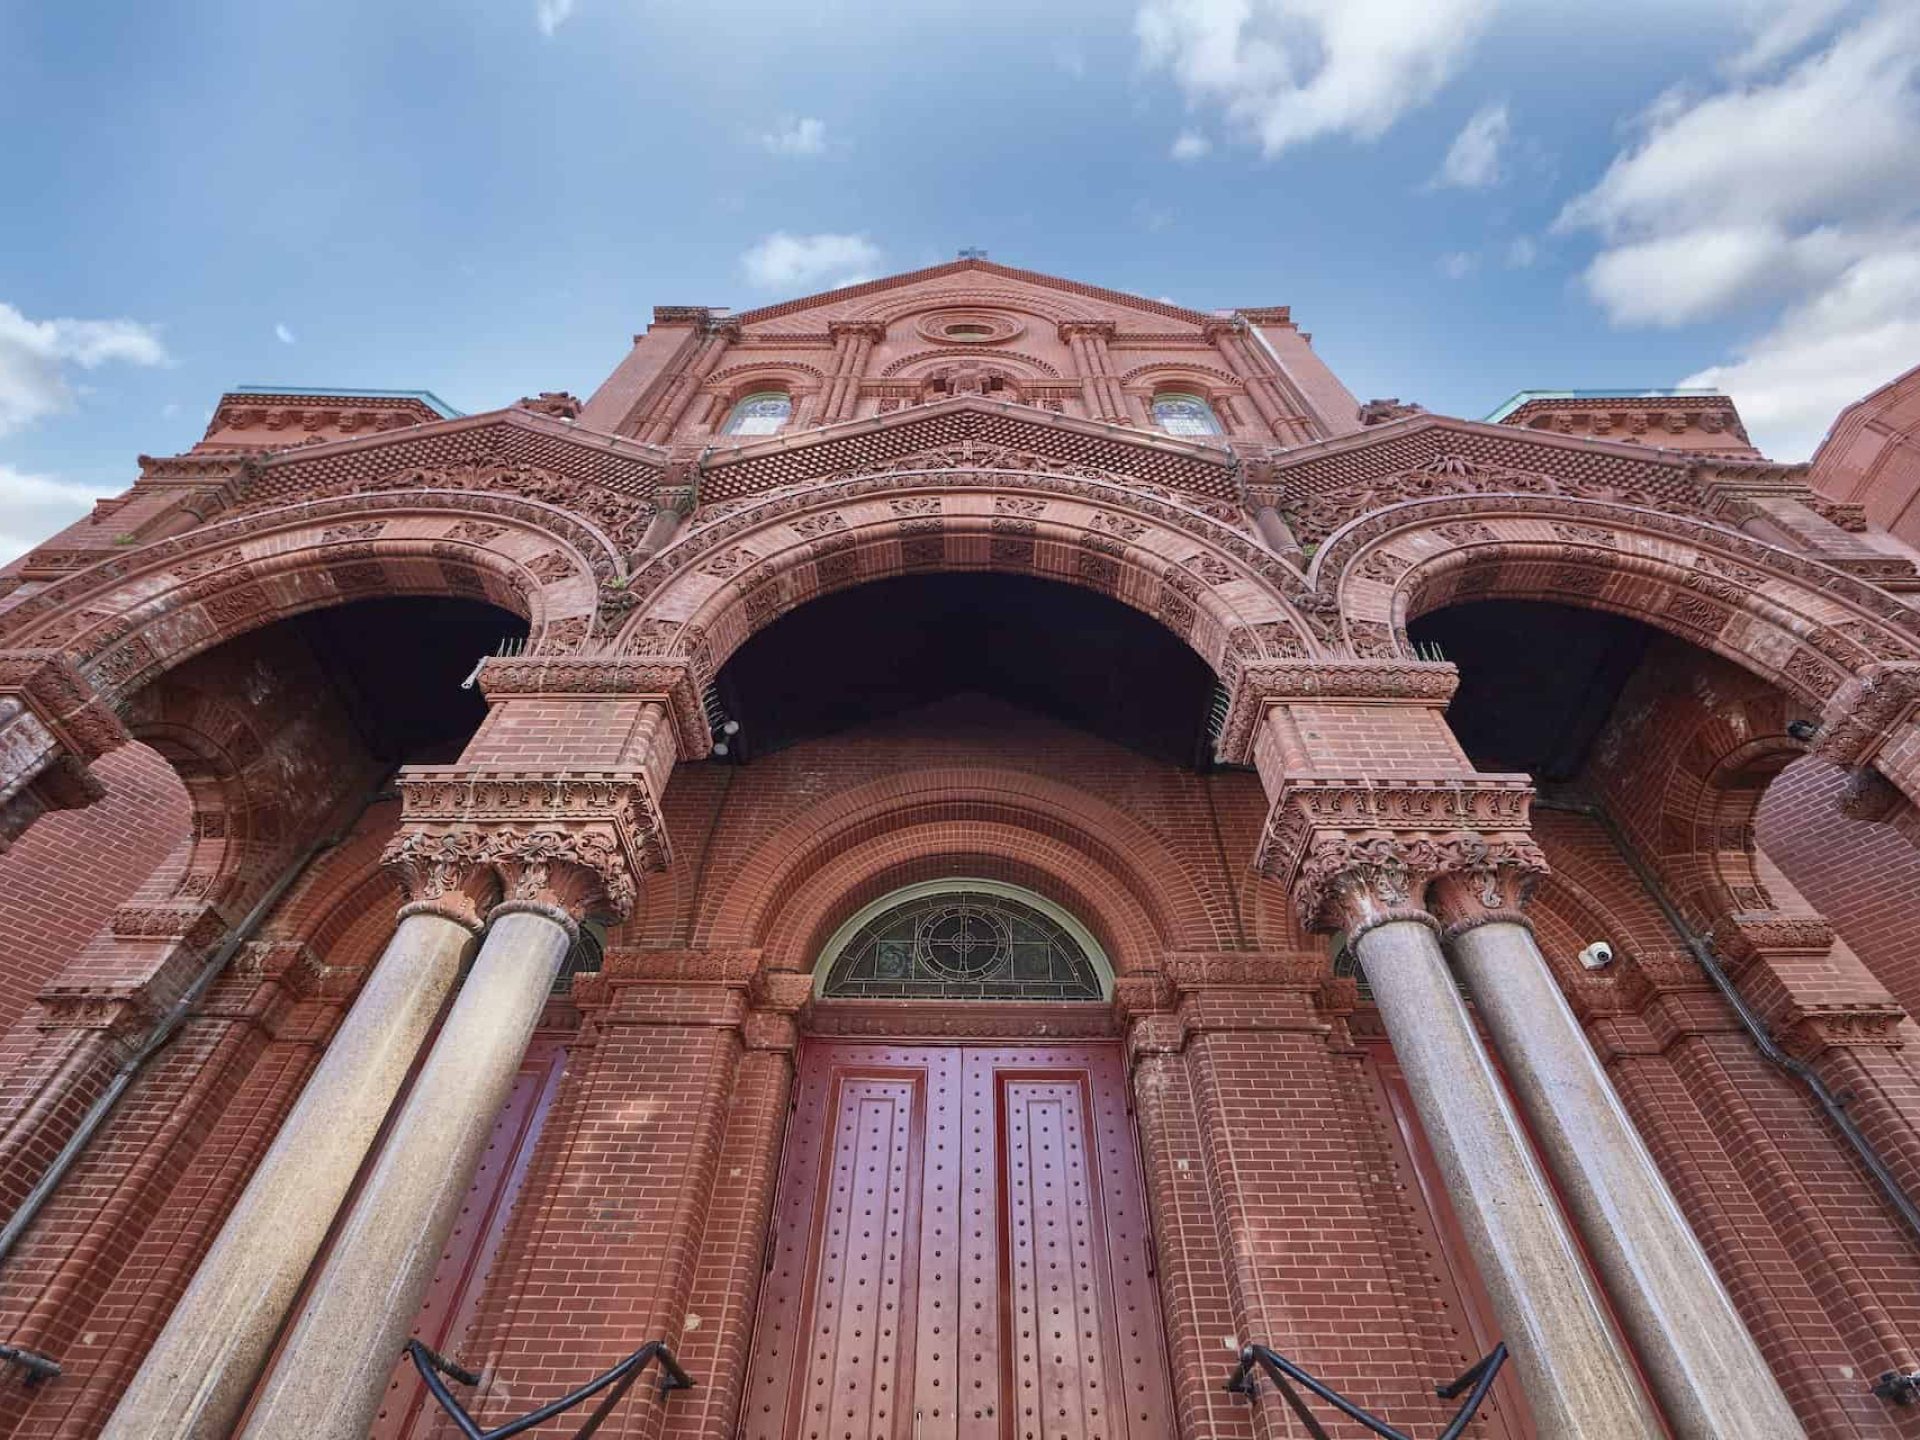 Close up of tall red brick building in New York. Large red double doors, stone columns supporting arched entryway.